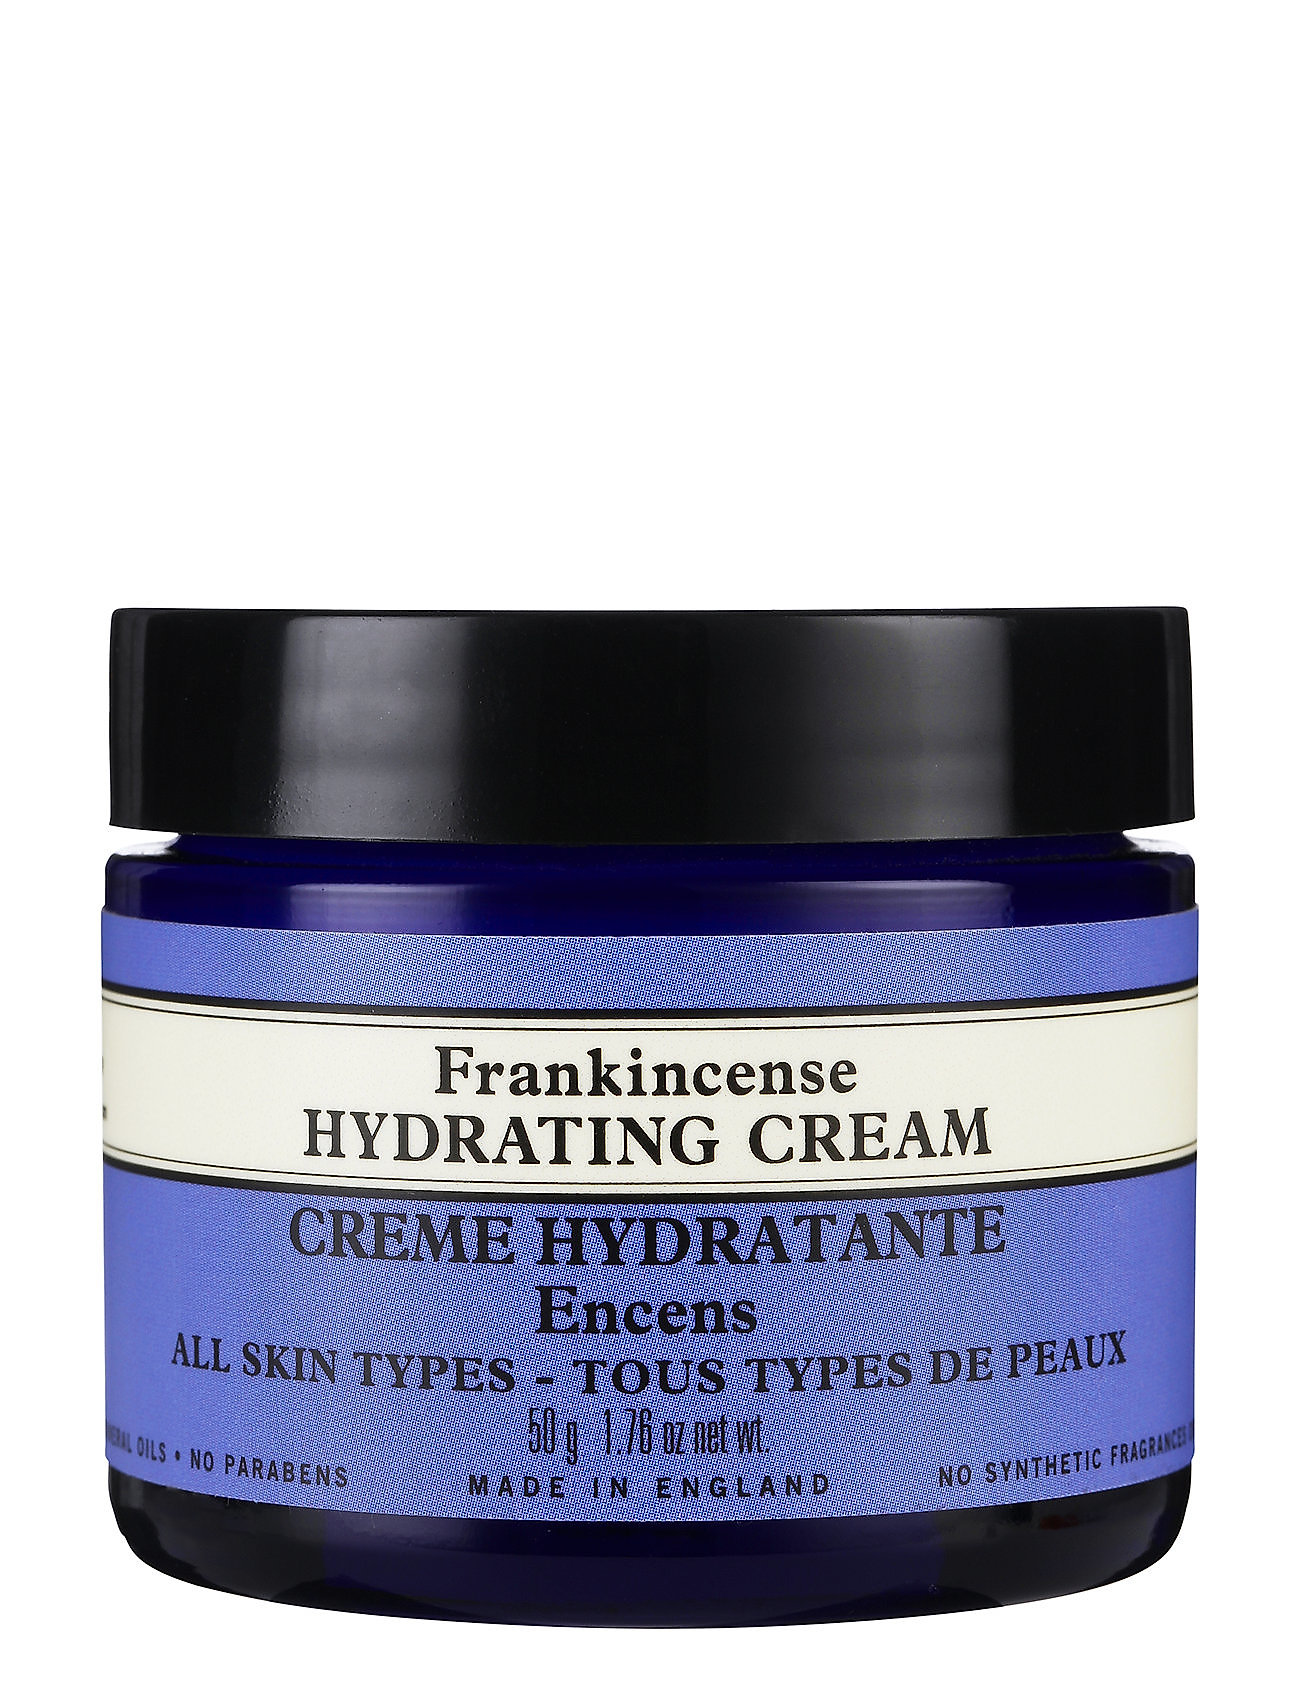 Frankincense Hydrating Cream Beauty WOMEN Skin Care Face Day Creams Nude Neal's Yard Remedies